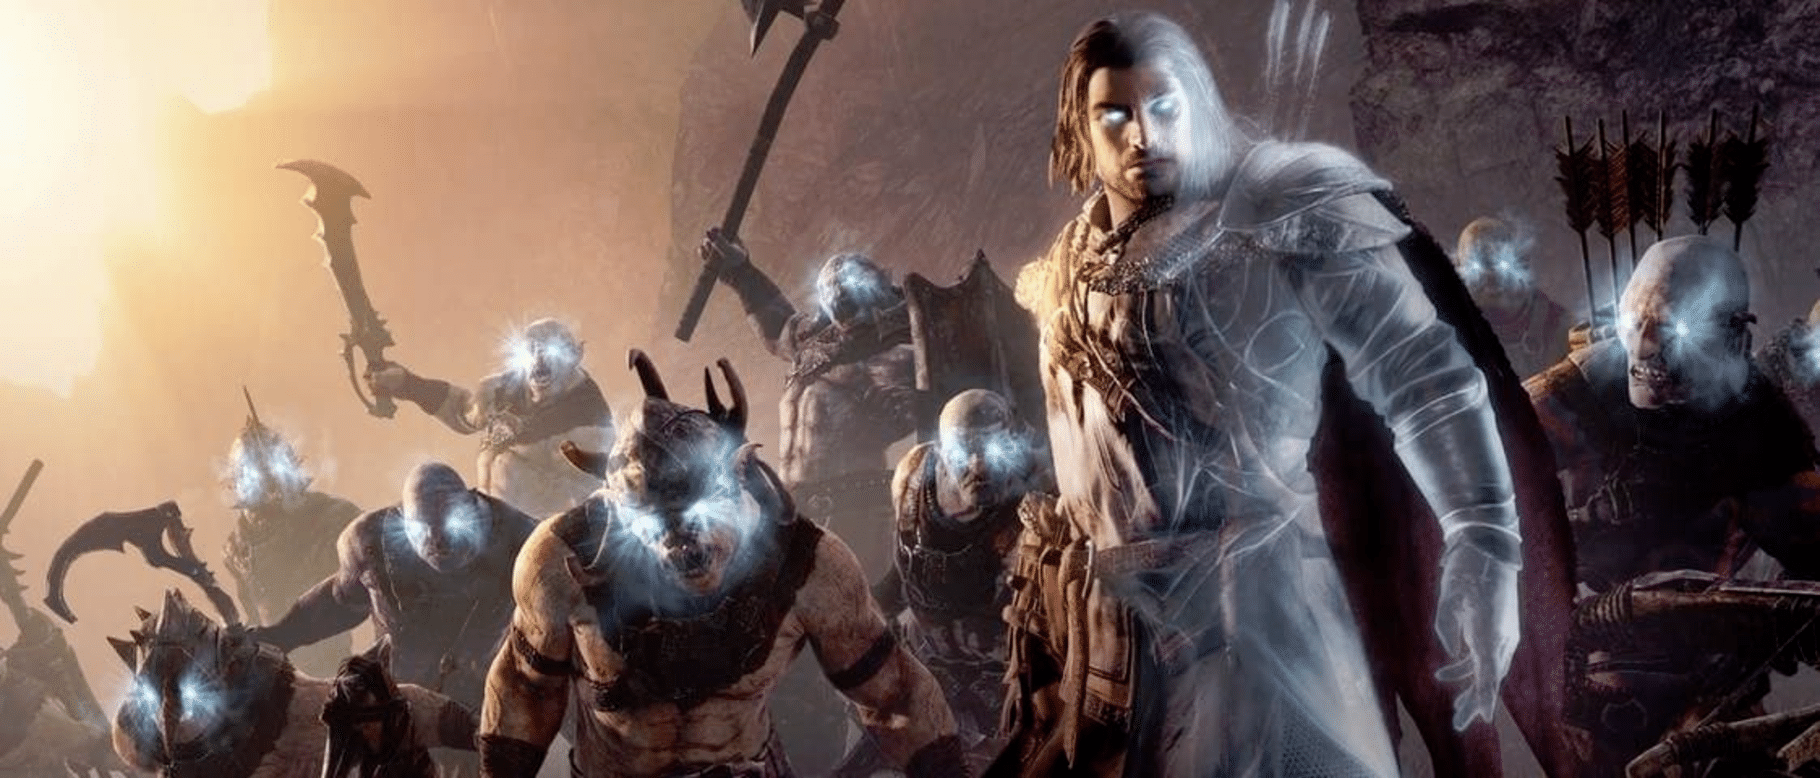 Middle-earth: Shadow of Mordor gets Game of Year Edition